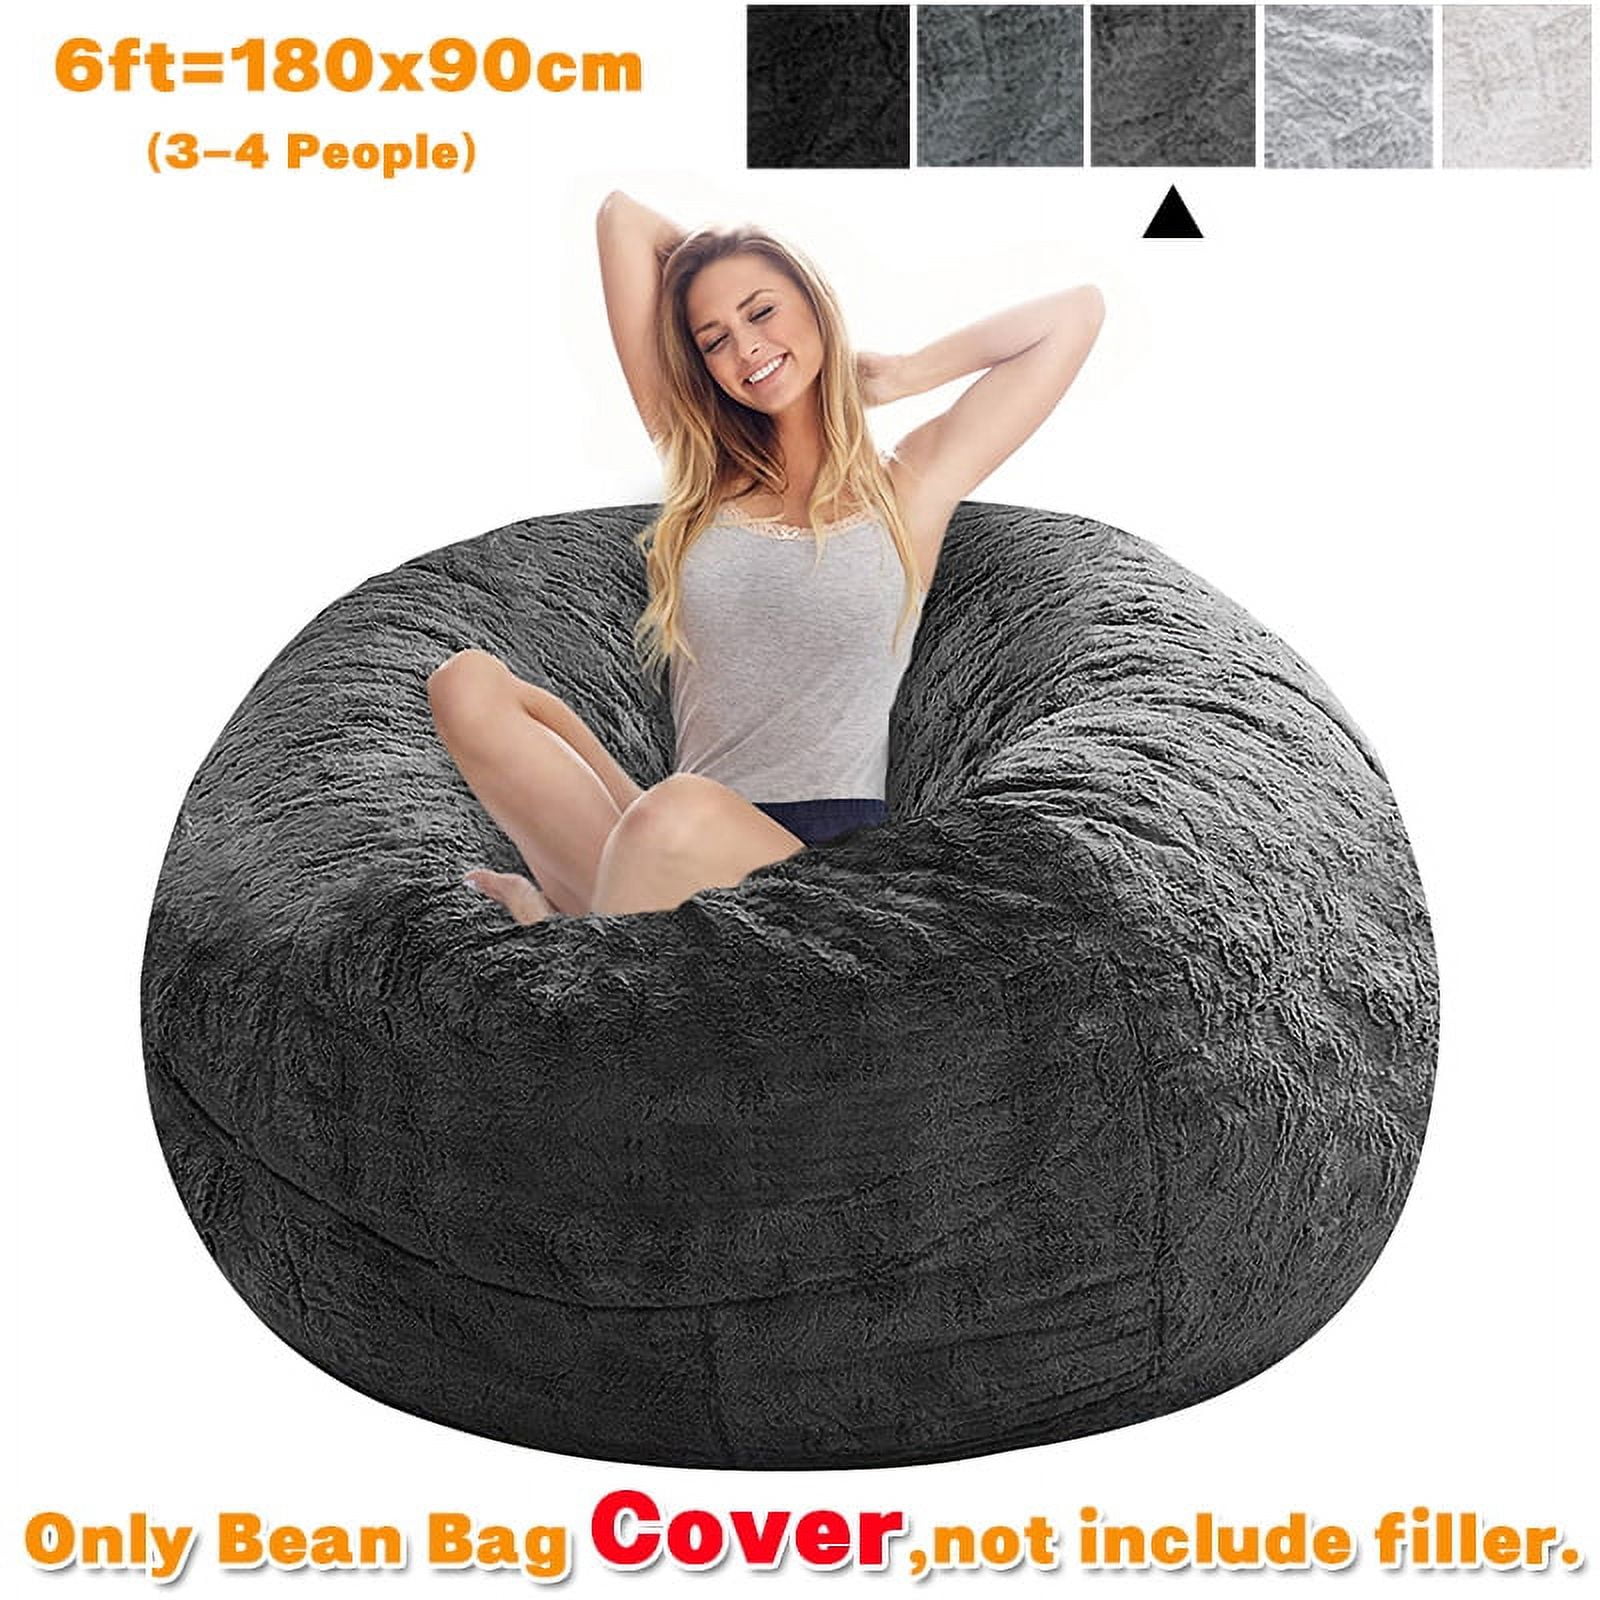 Giant Bean Bag for Adults, 7Ft 6Ft 5Ft Bean Bag Chair, Washable Bean Bag  Chair Large Lounger Cover for Dorm Family Room (No Filler),Yellow,5TF